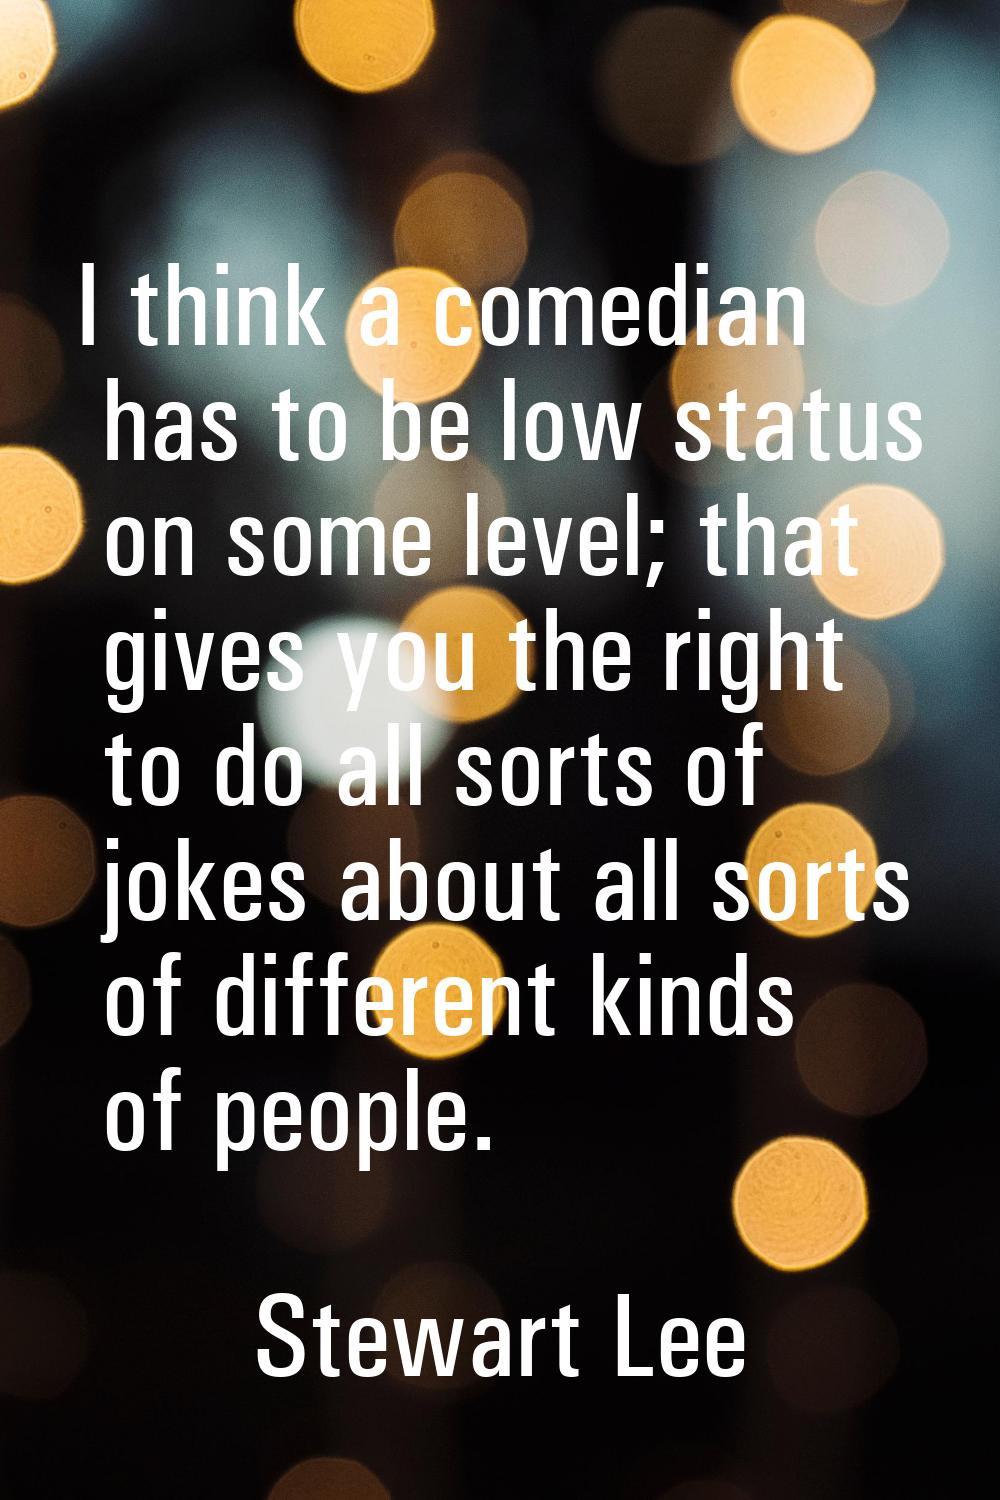 I think a comedian has to be low status on some level; that gives you the right to do all sorts of 